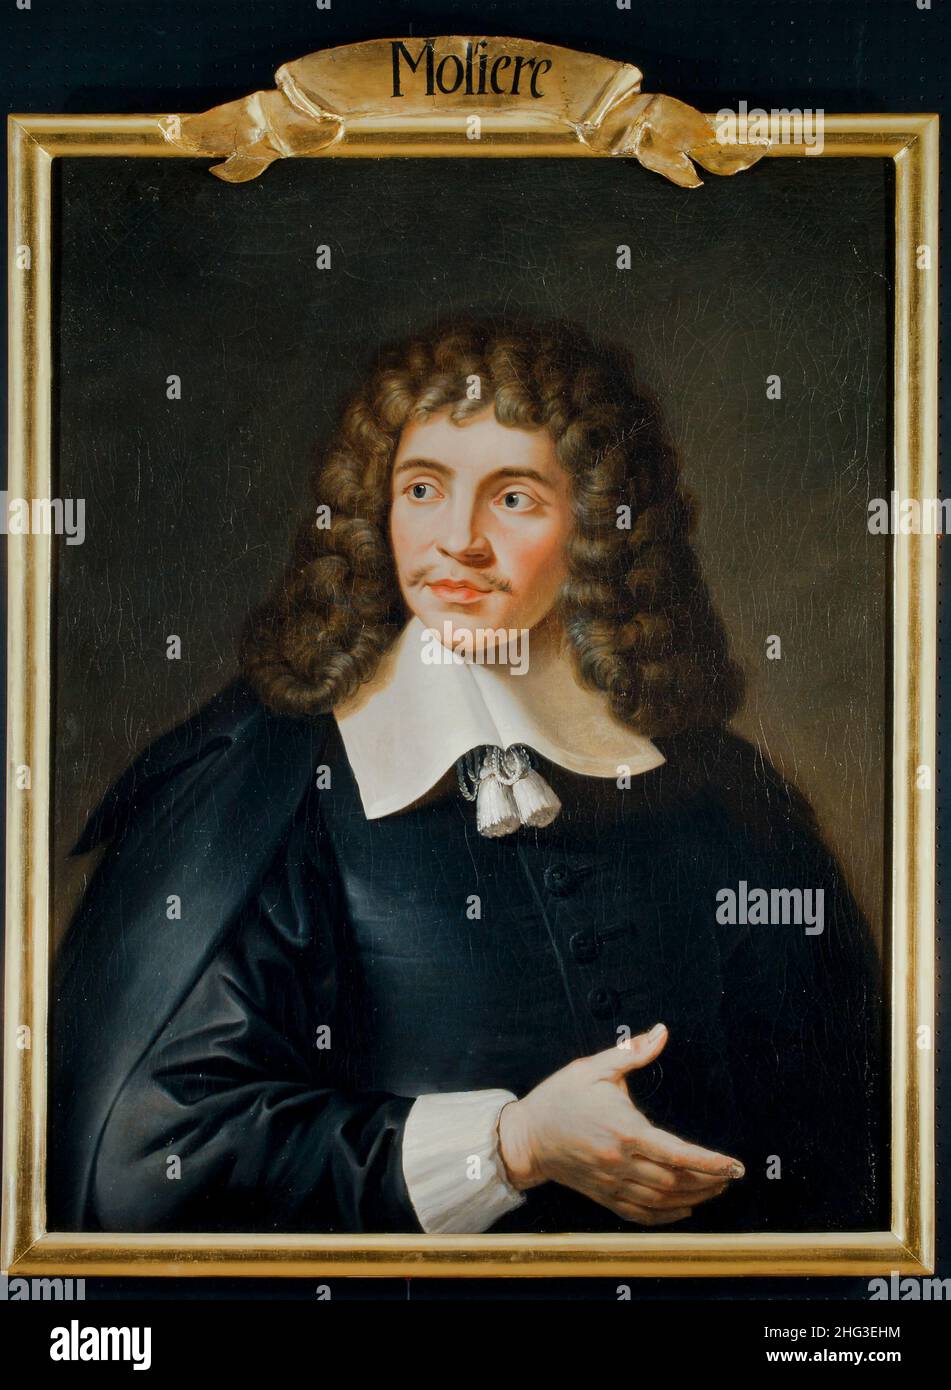 The 19th century oil painting of Iohann Baptista Poquelin von Moliere.  Jean-Baptiste Poquelin (1622 – 1673), known by his stage name Molière, was a F Stock Photo